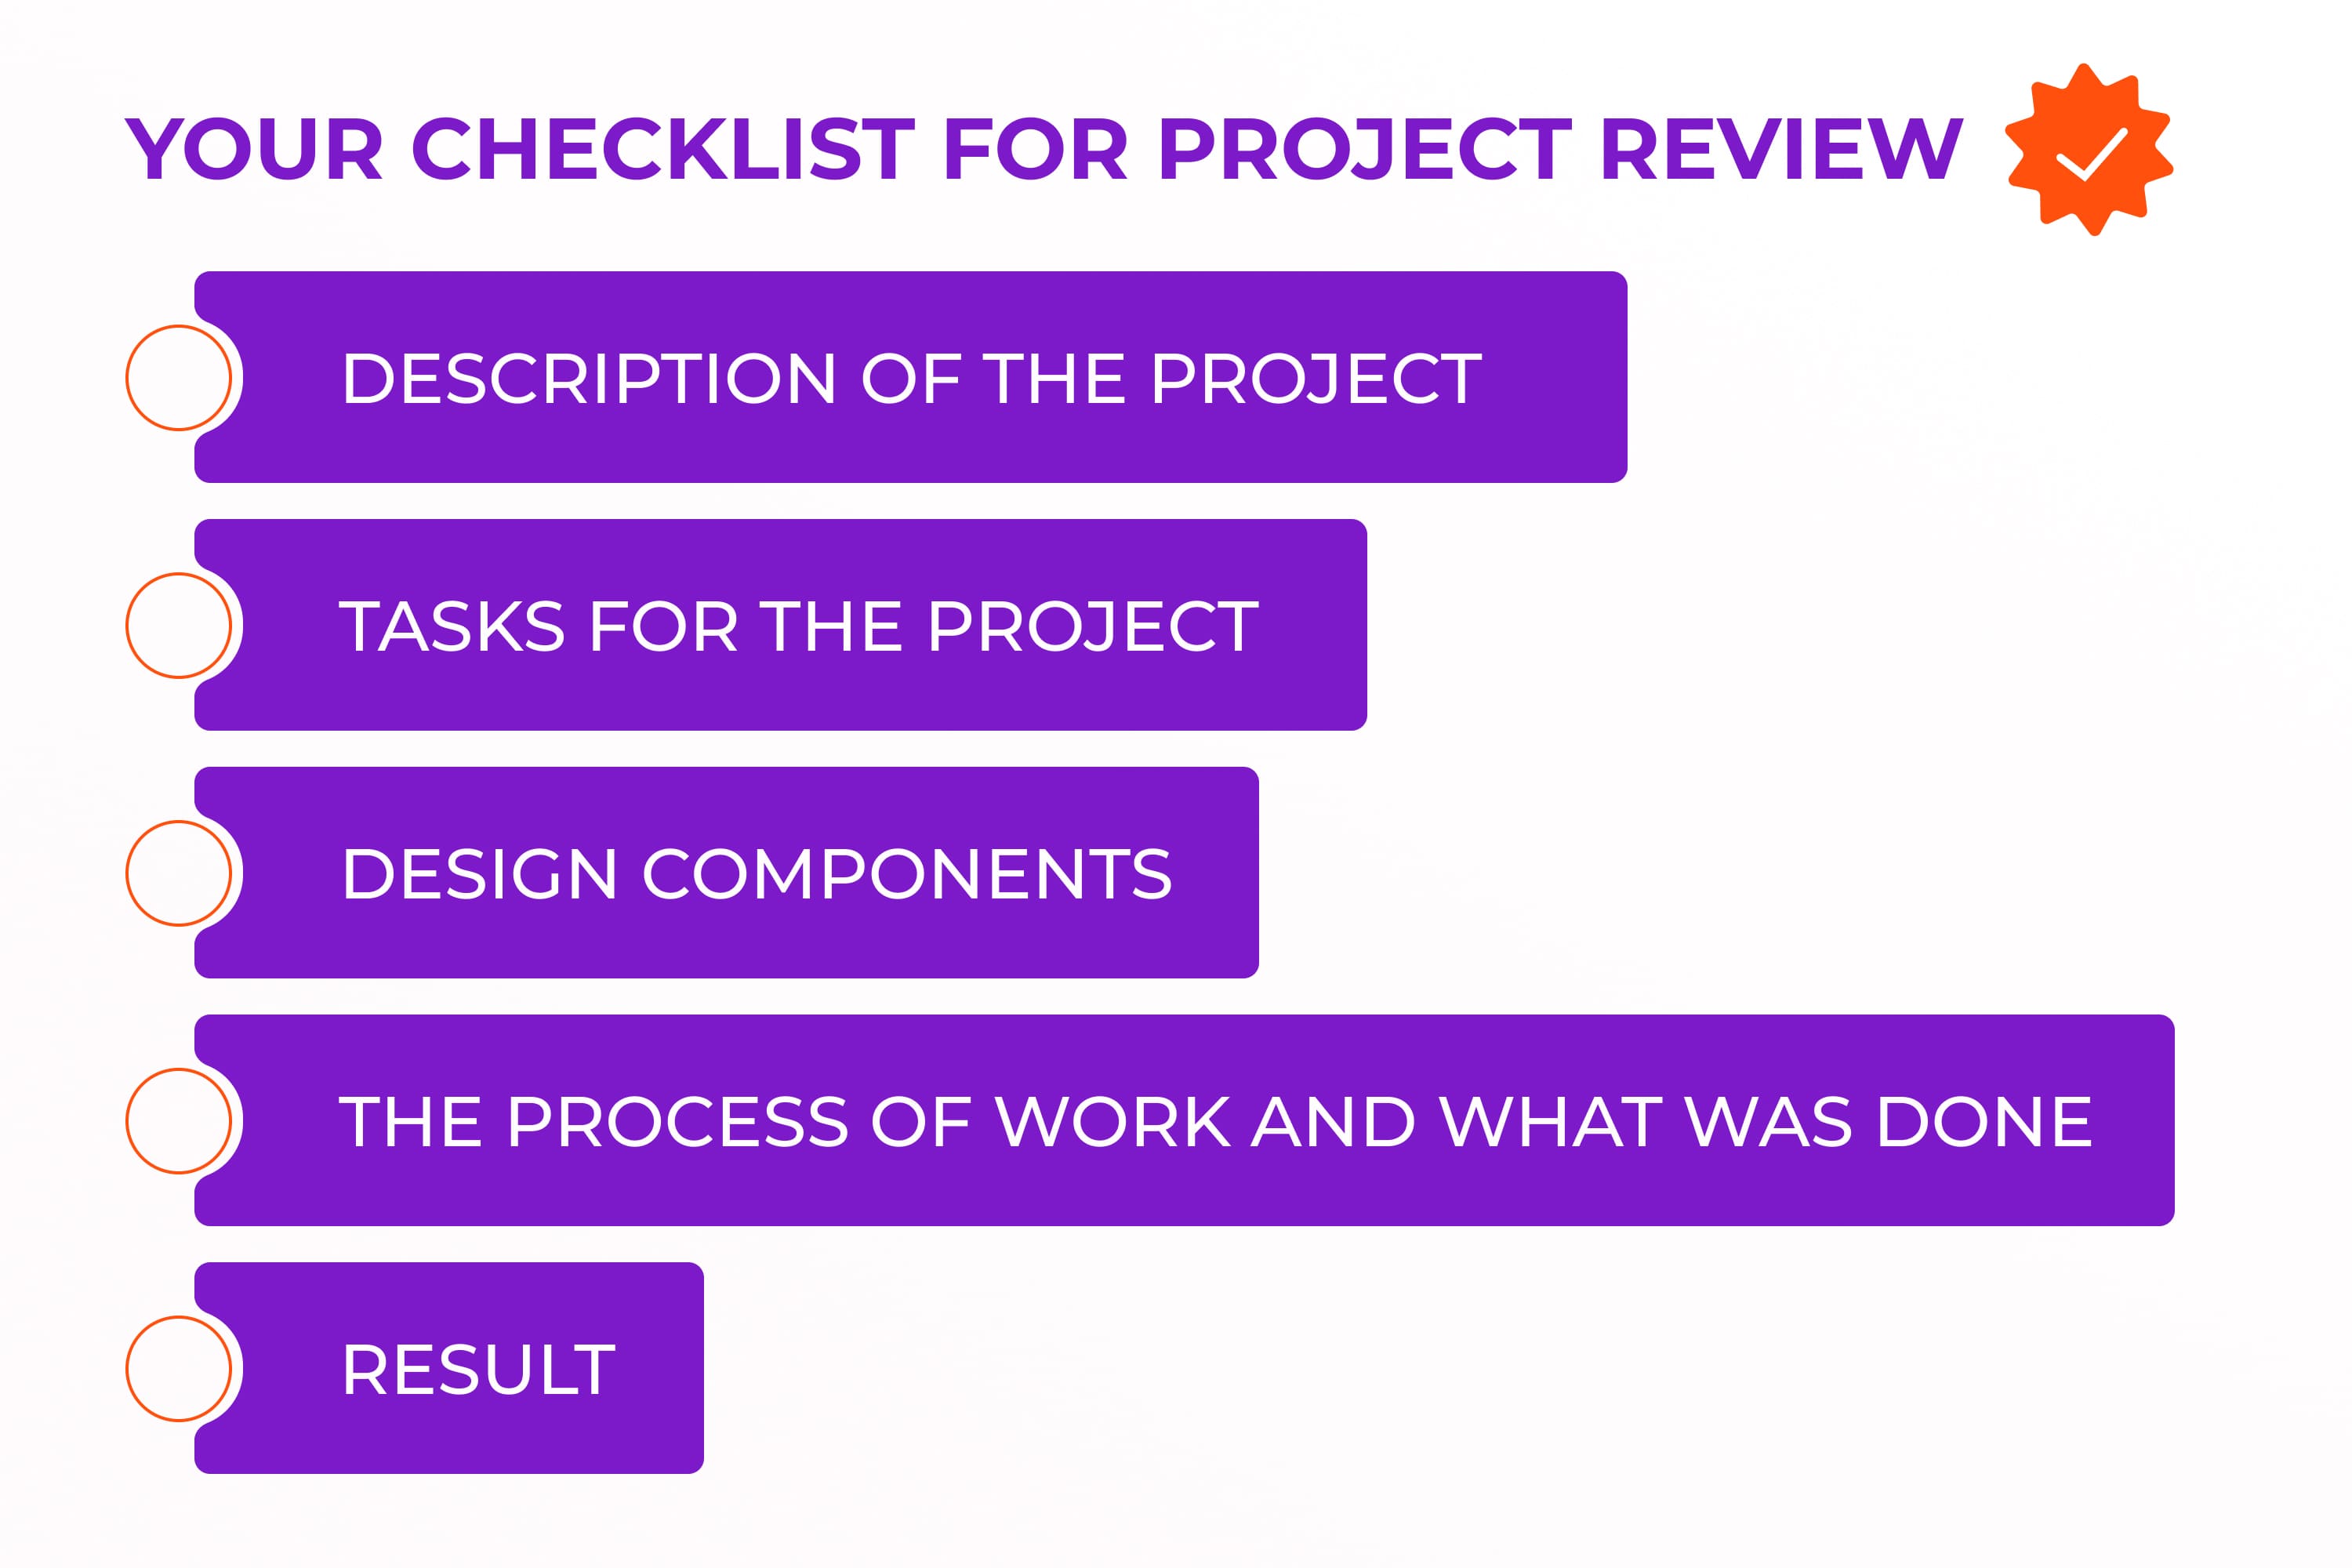 Structure checklist for checking your projects.